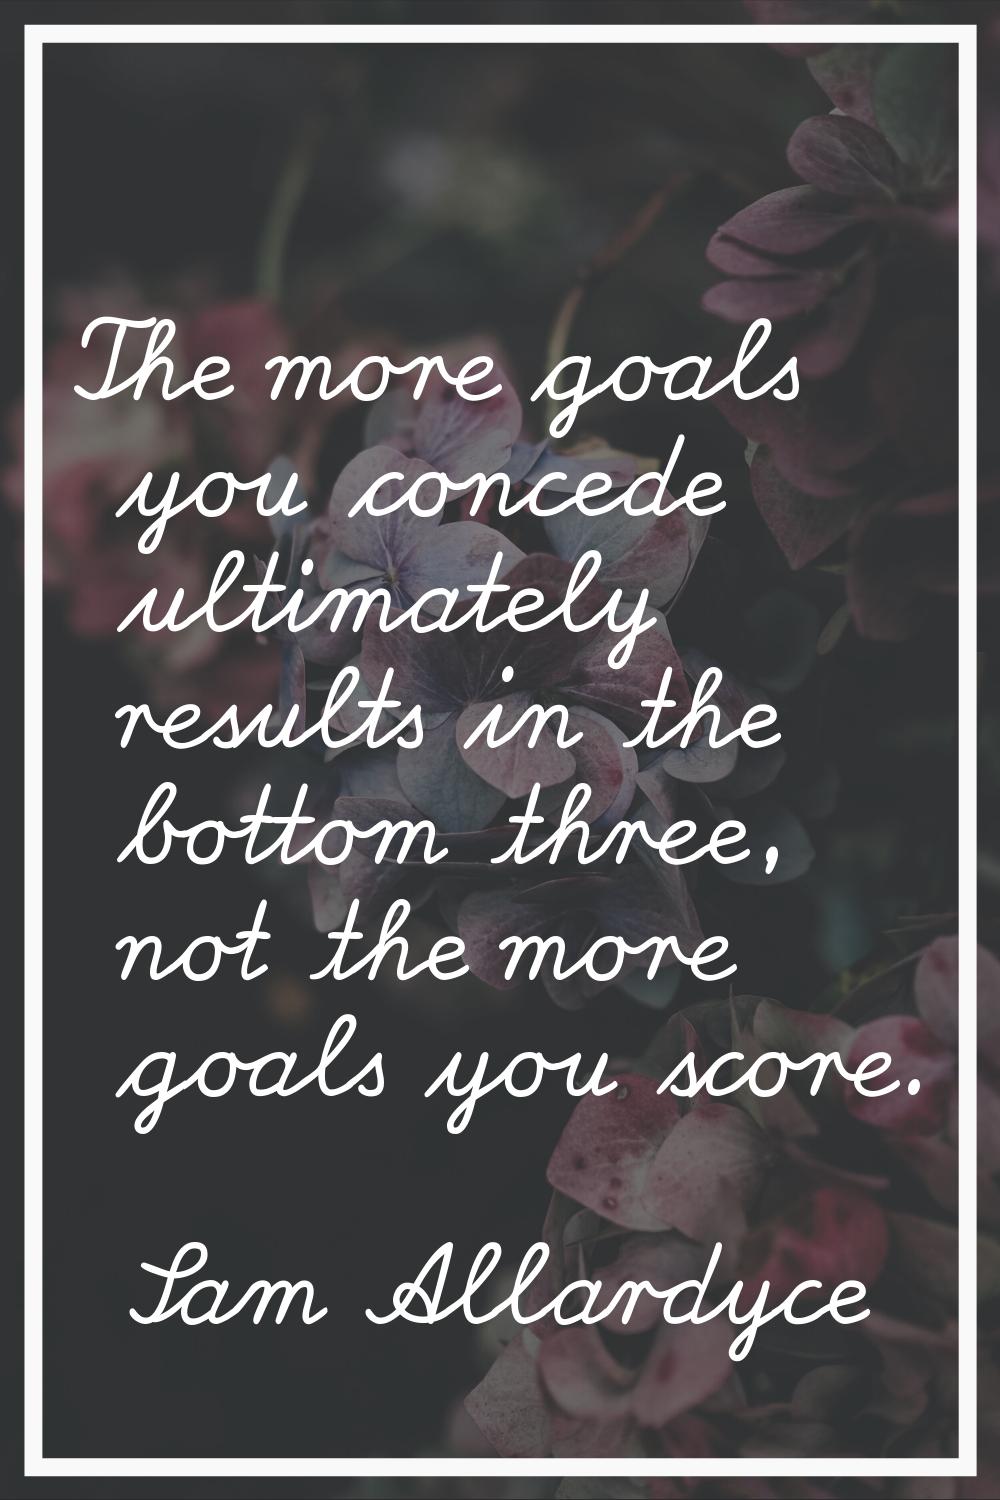 The more goals you concede ultimately results in the bottom three, not the more goals you score.